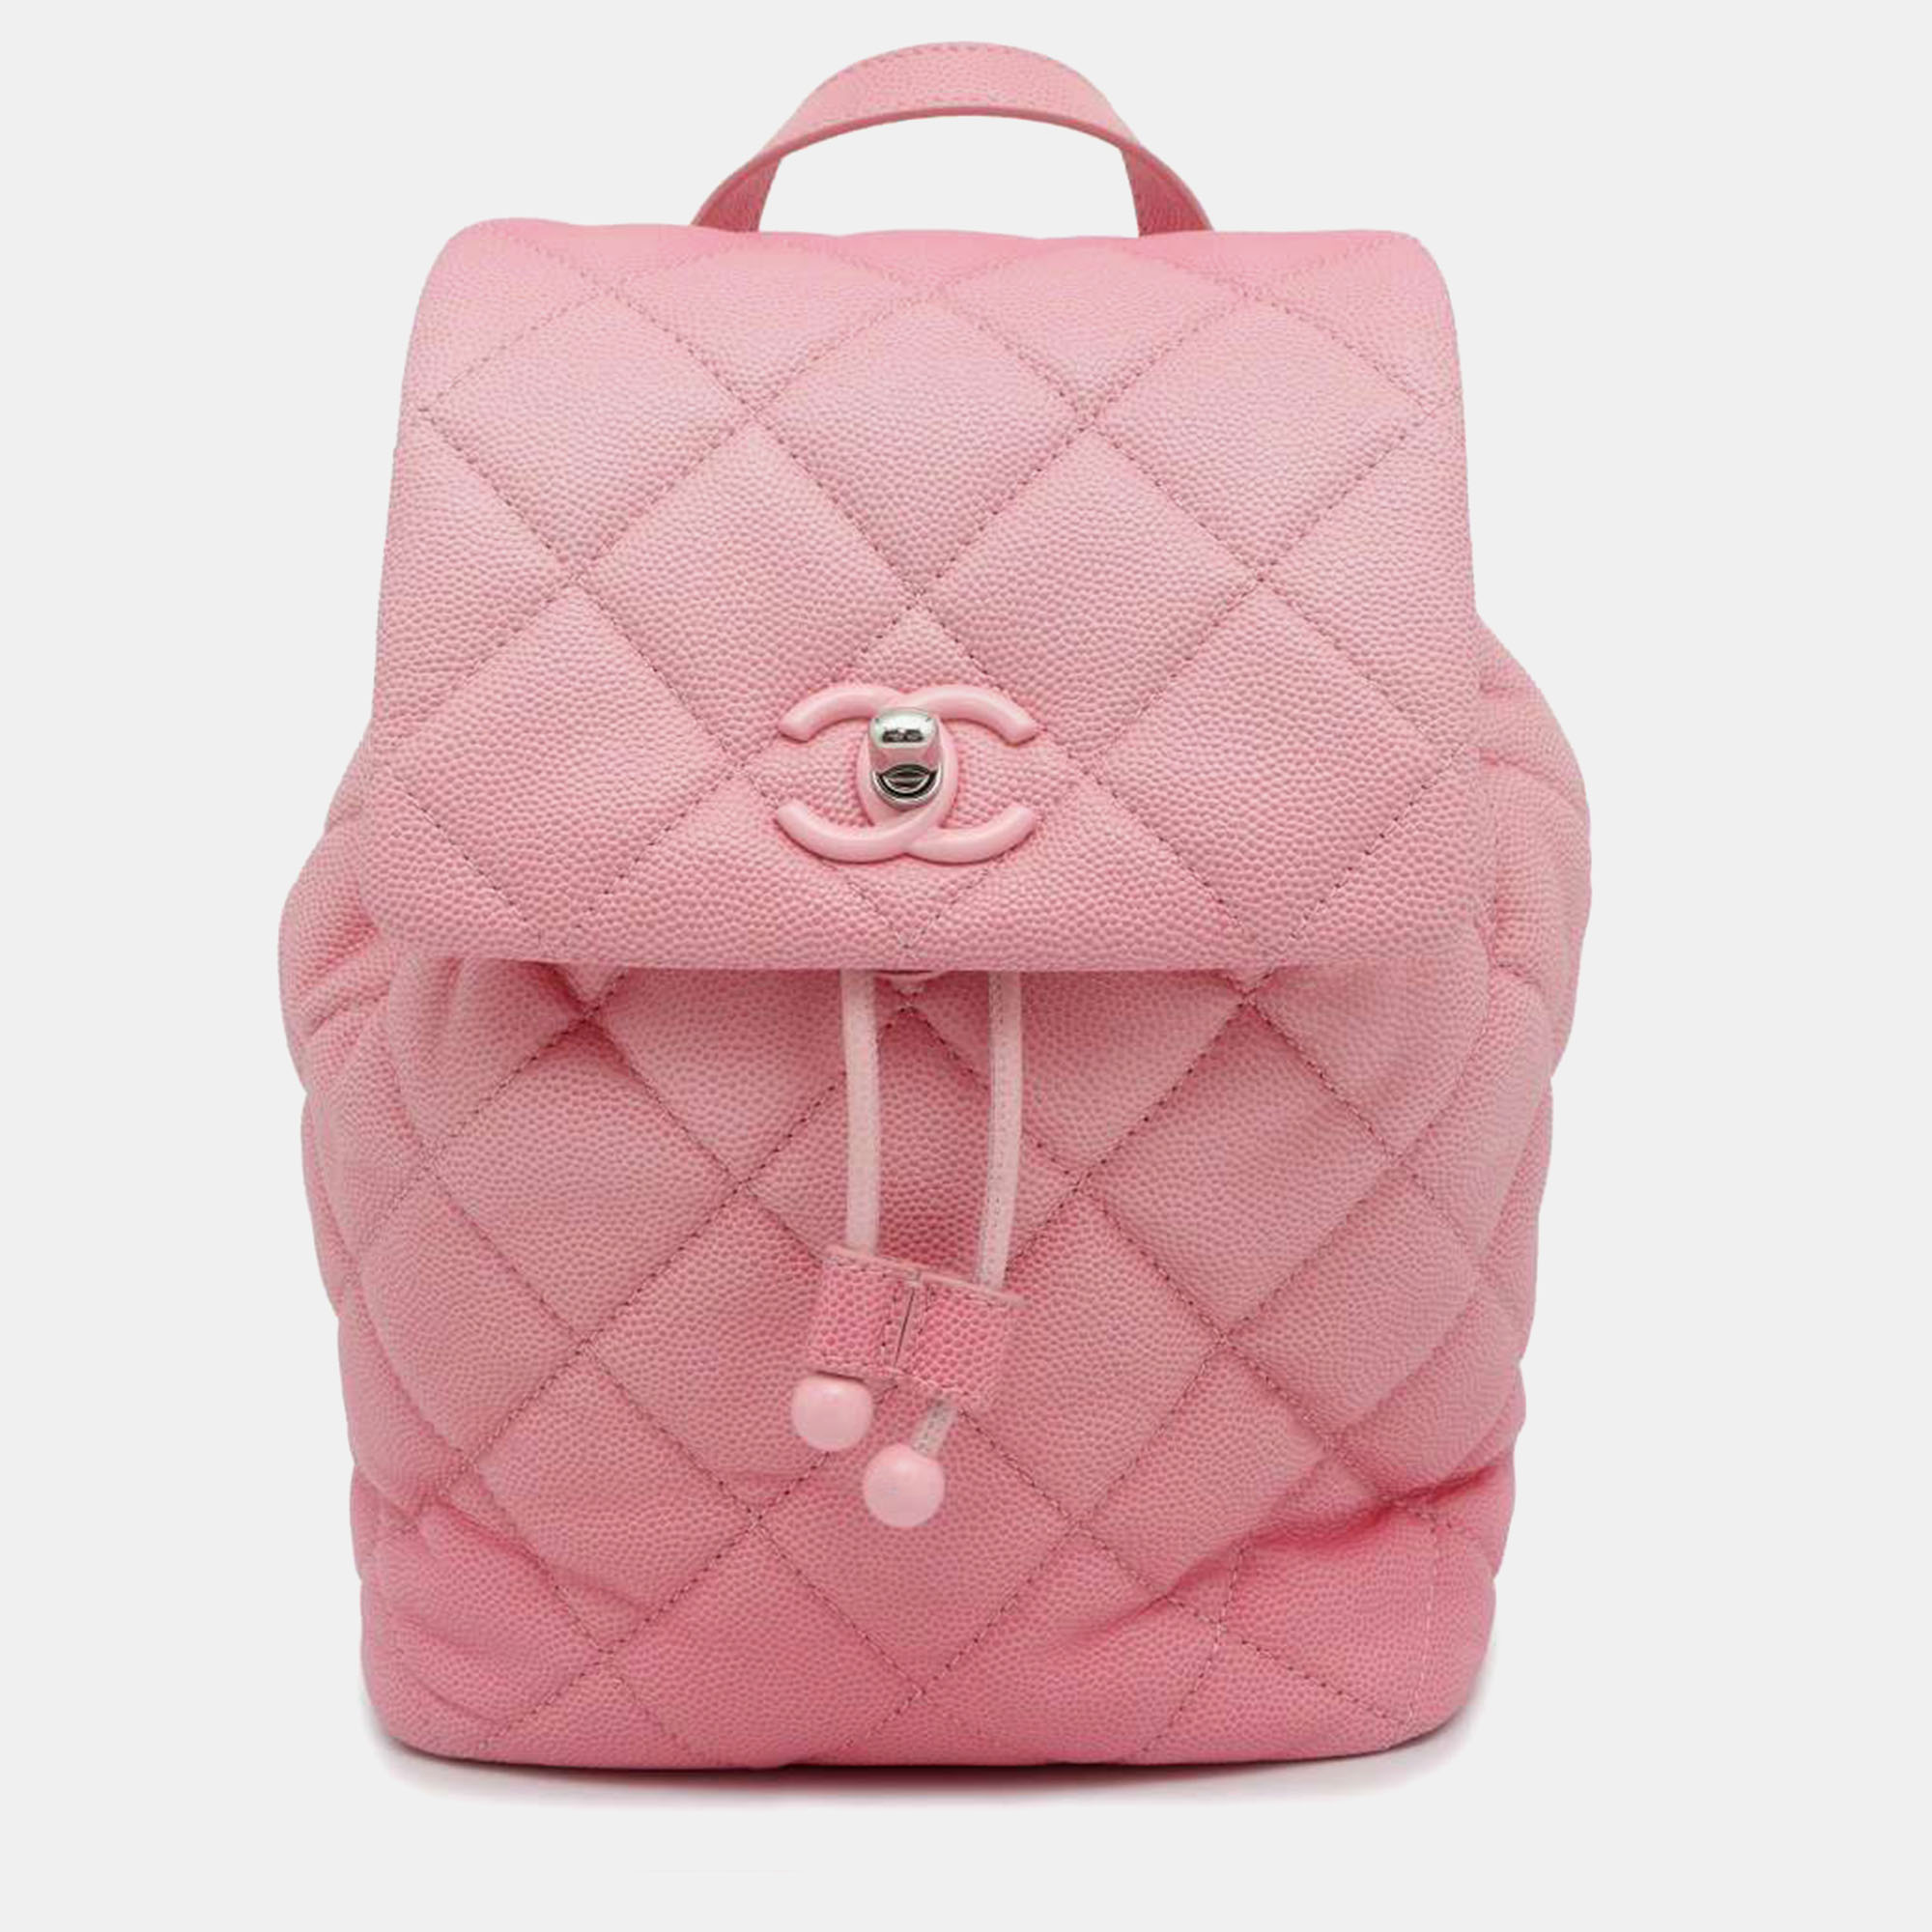 Pre-owned Chanel Pink Caviar Leather Mini Cc Logo Backpack